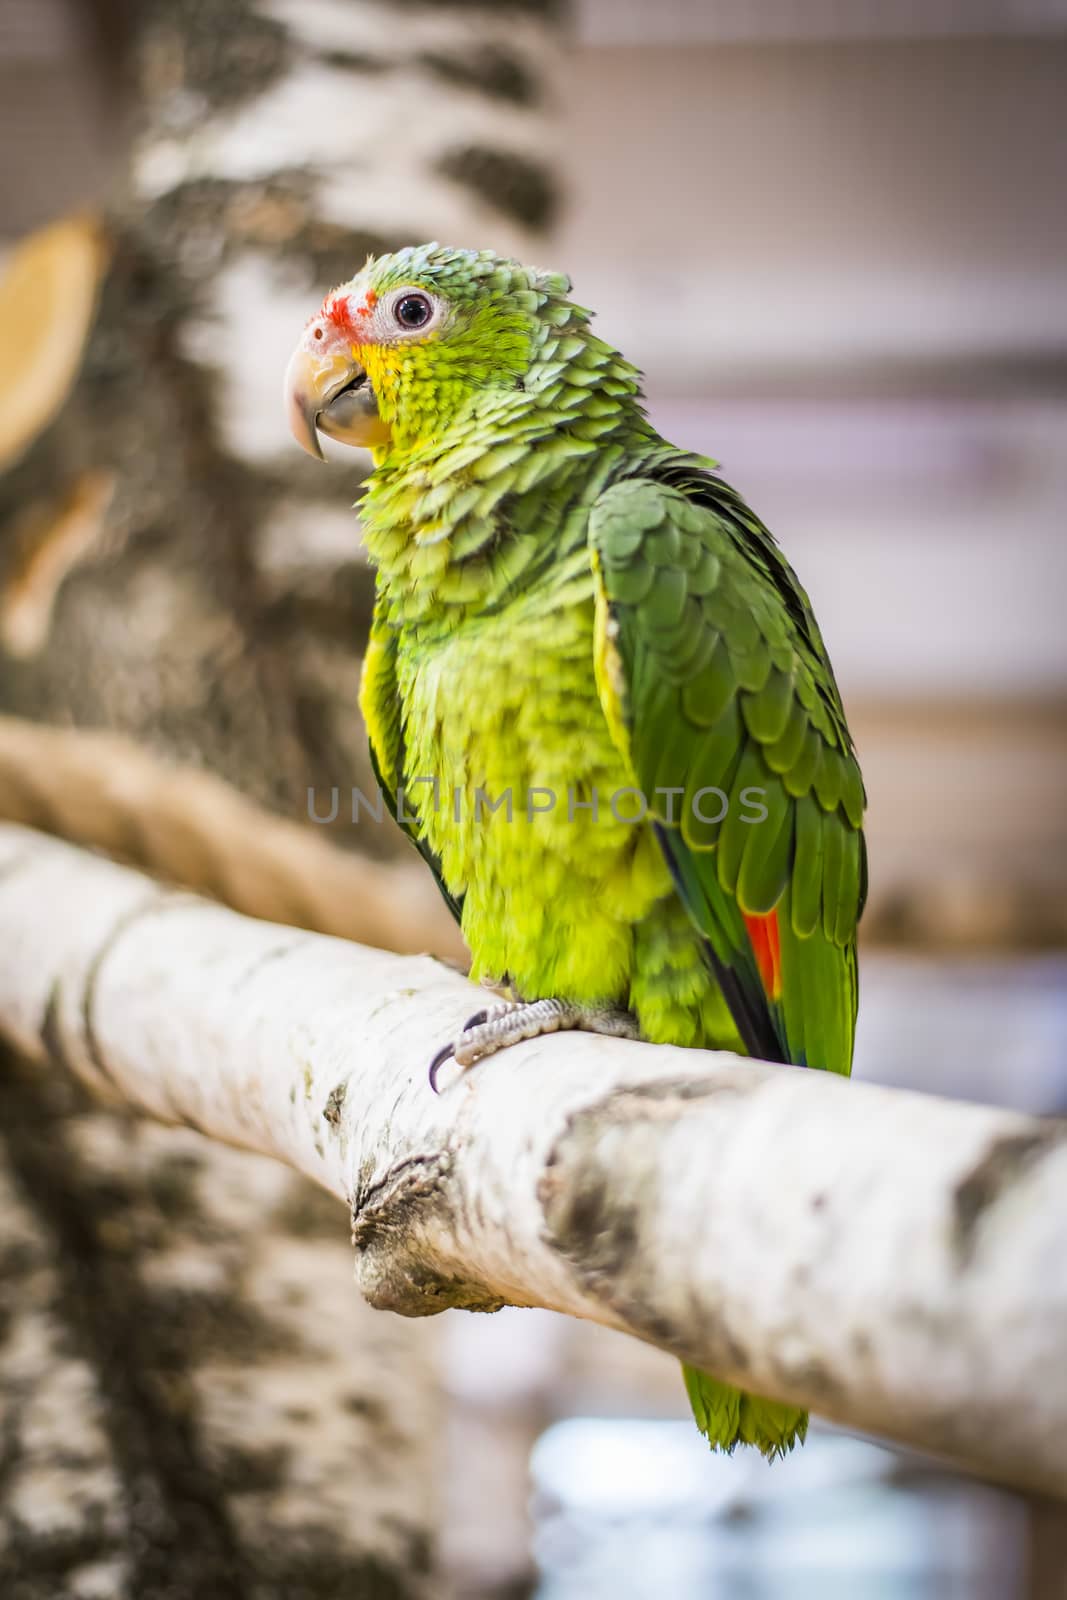 A parrot at zoo by furzyk73